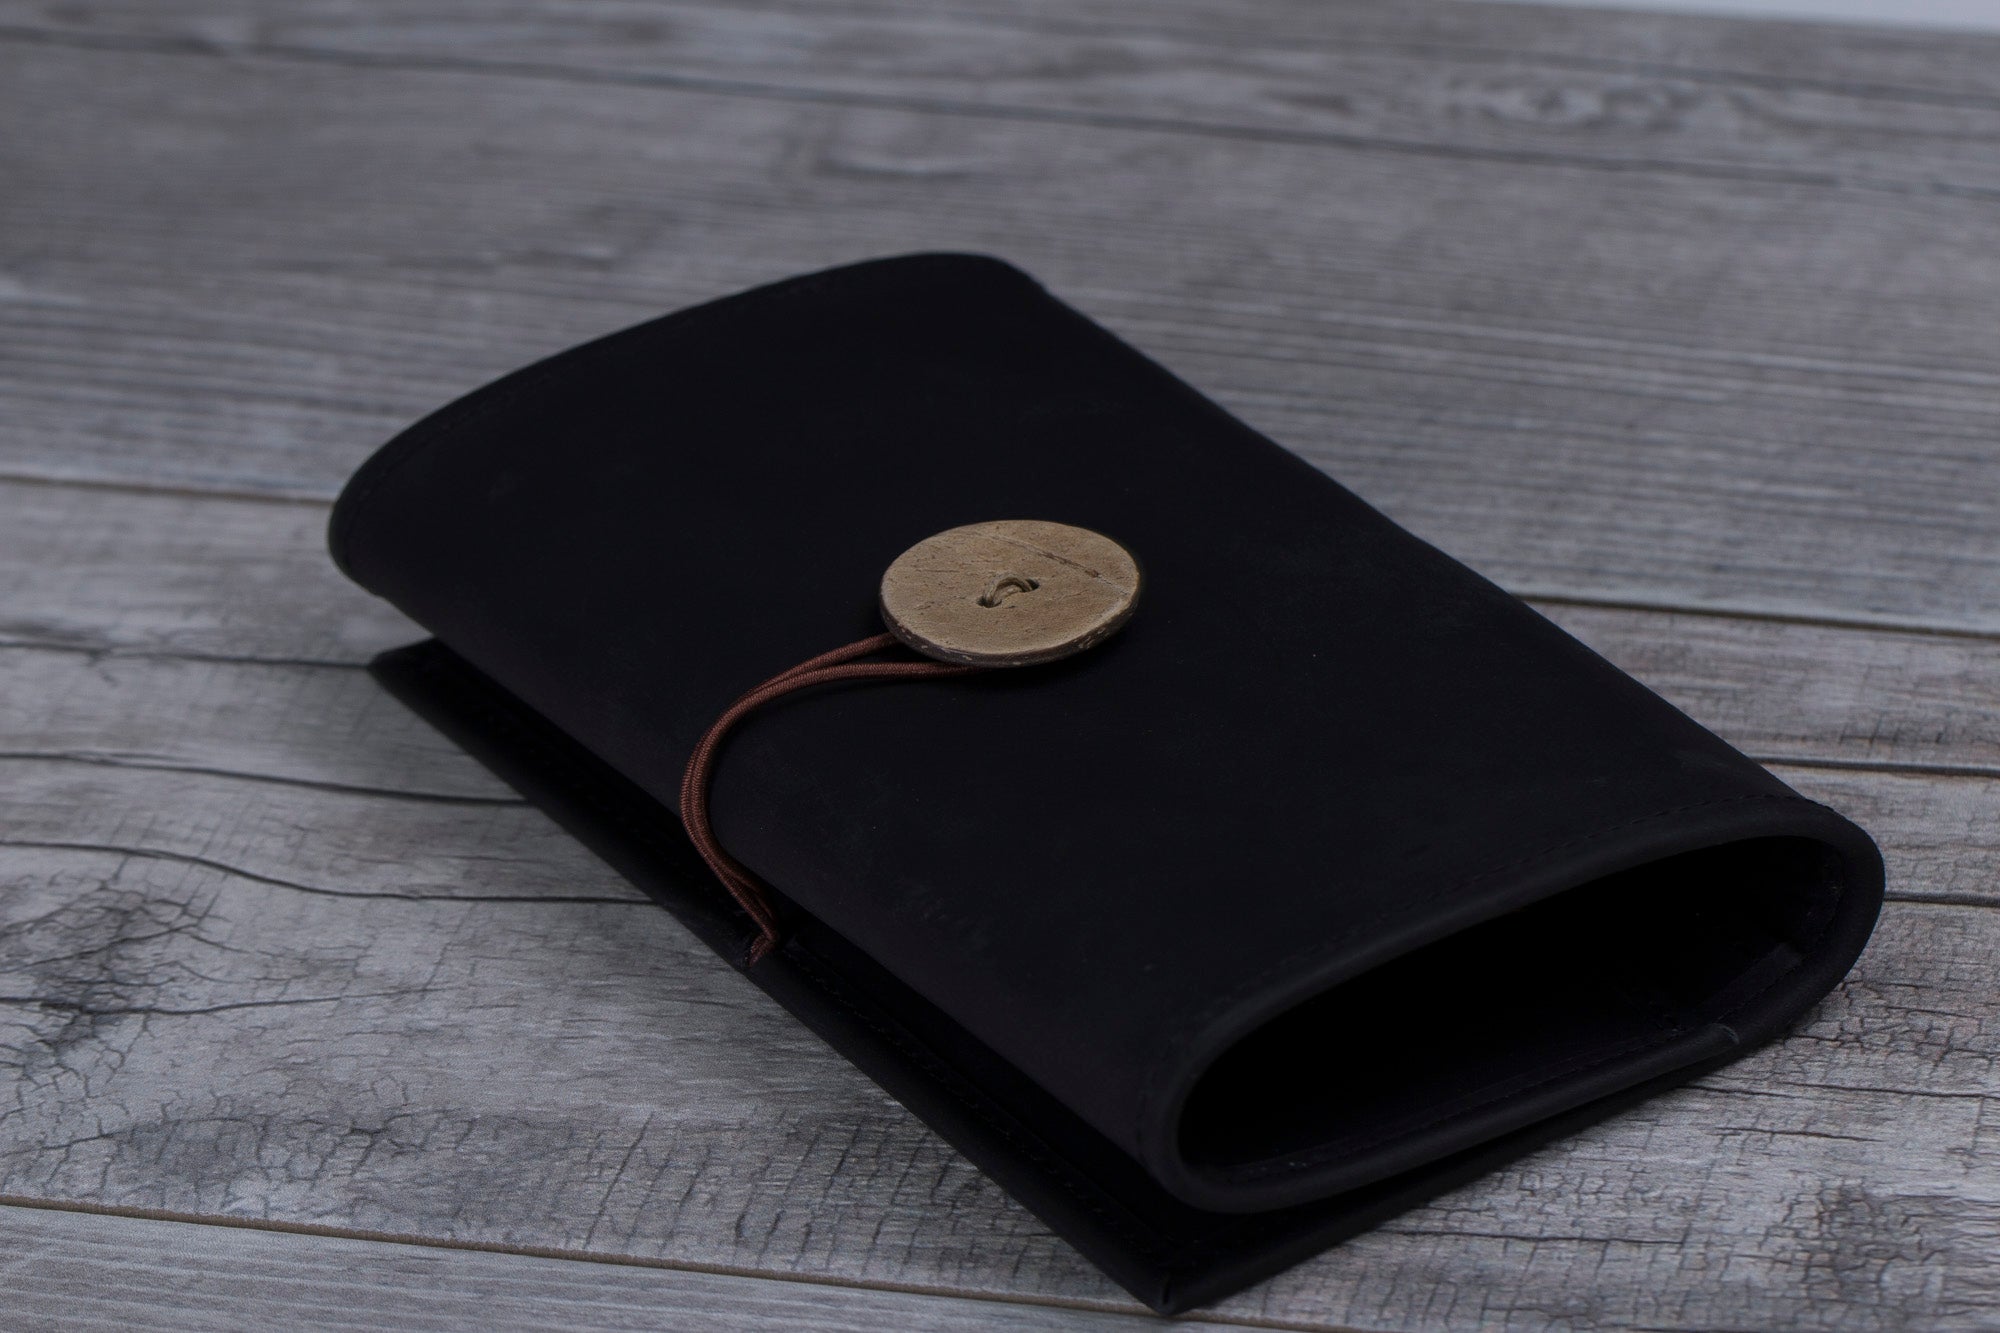 Black Leather Cable Organizer.